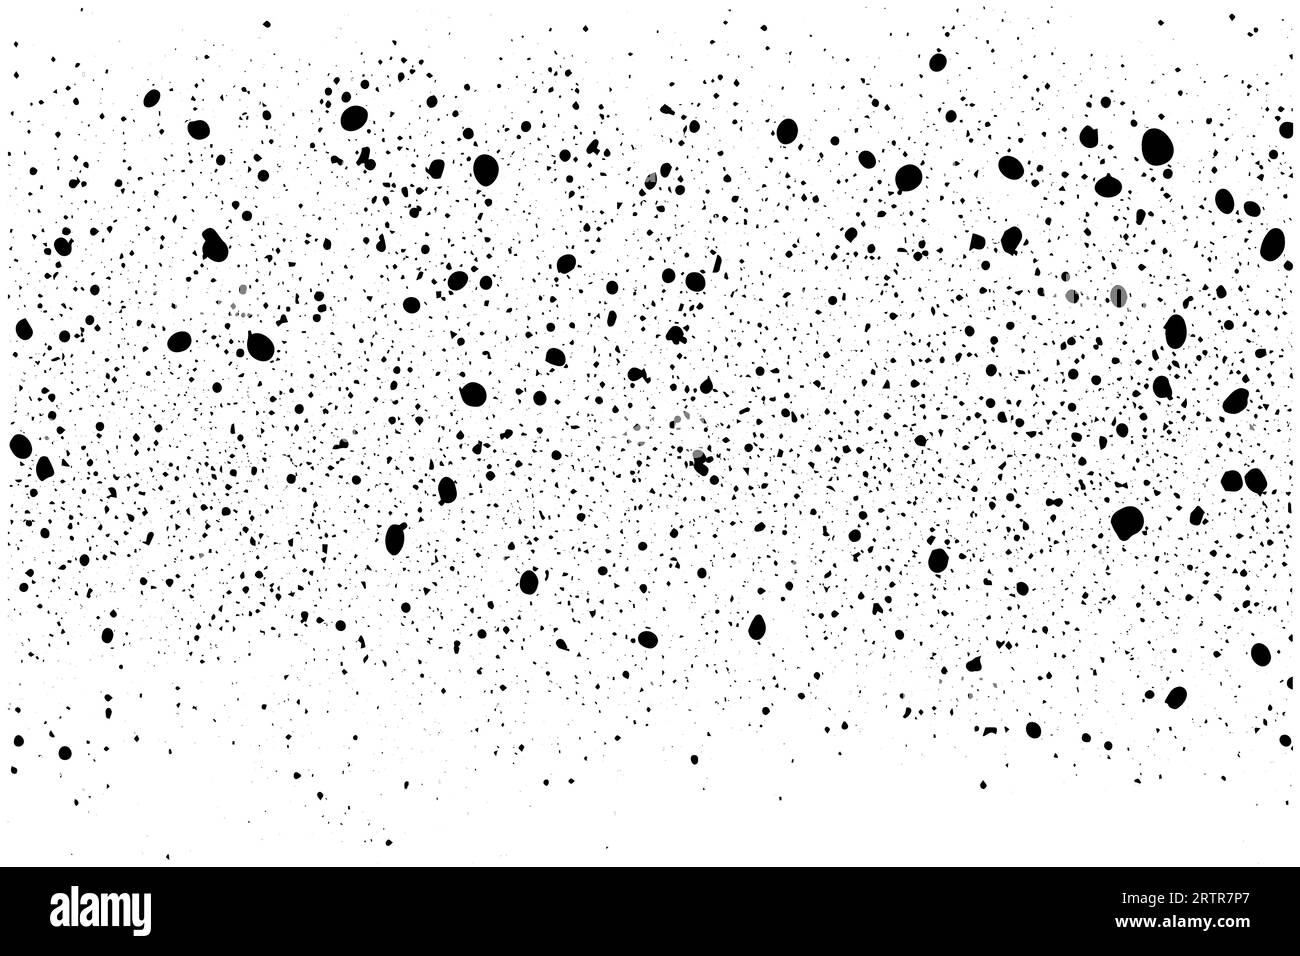 Gritty gravel texture. Gradient halftone overlay backdrop. Monochrome abstract splattered design vector background. Stock Vector